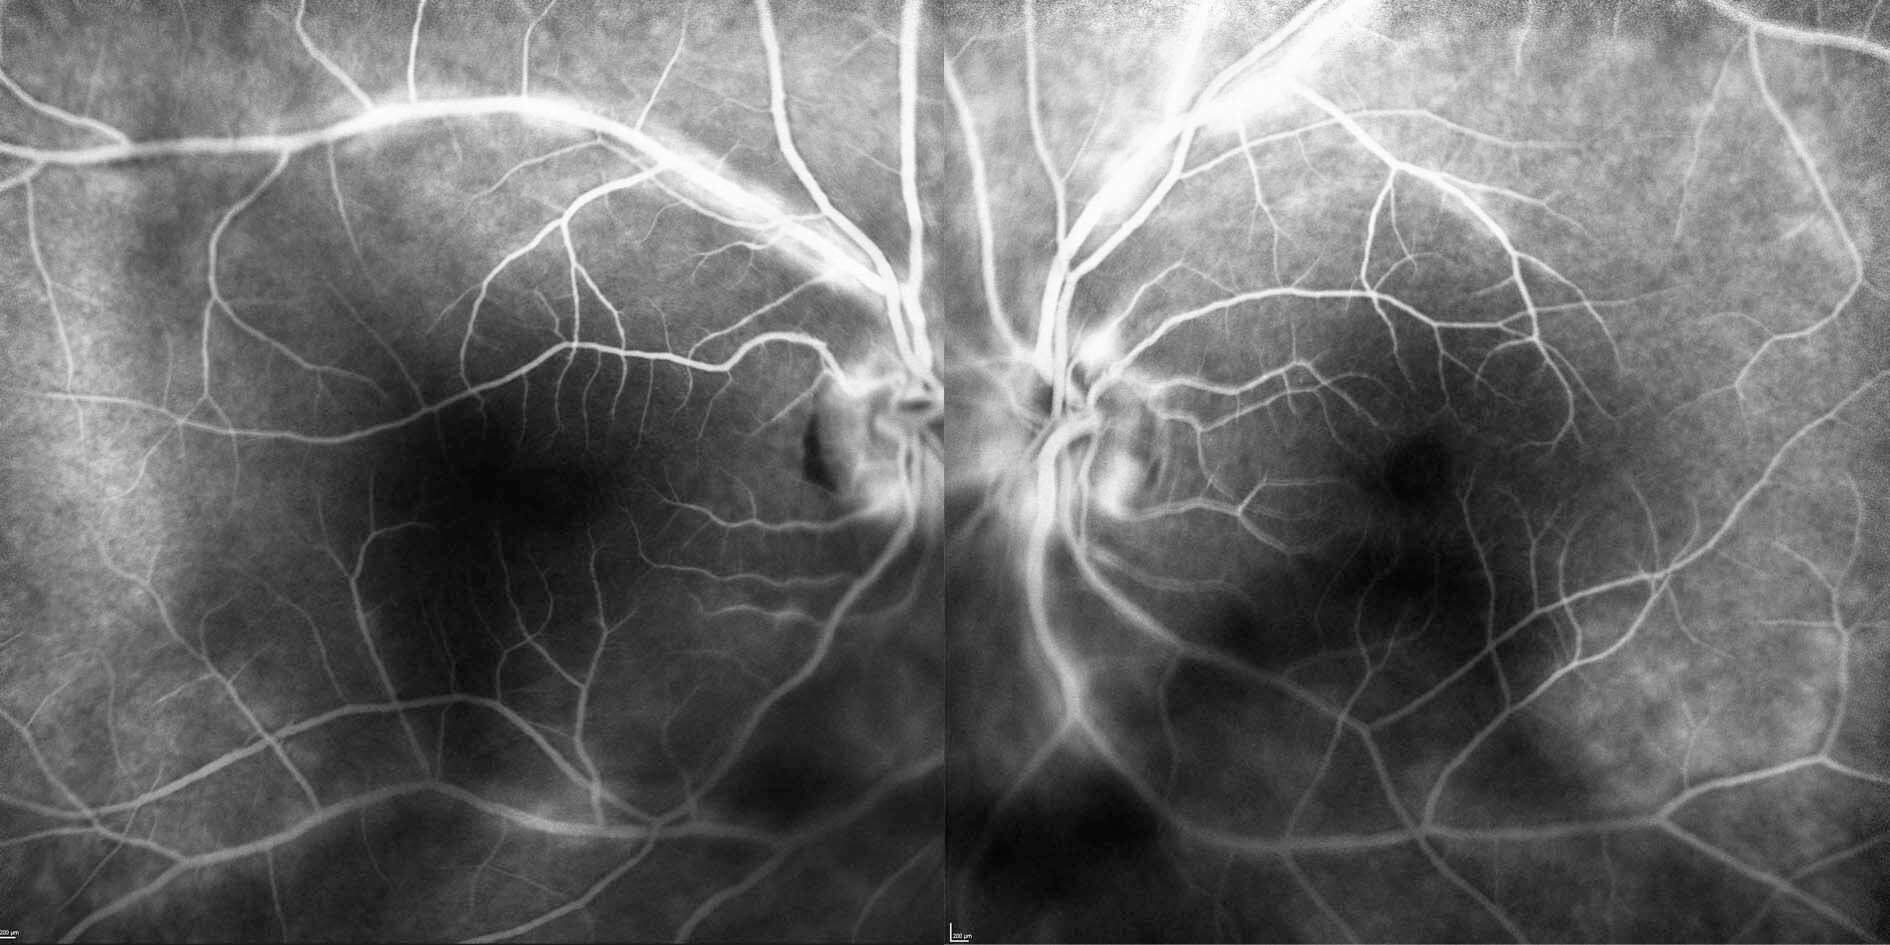 Fluorescein angiography demonstrates bilateral vasculitis (hyperfluorescent leakage along the retinal vessels) and disc leak.